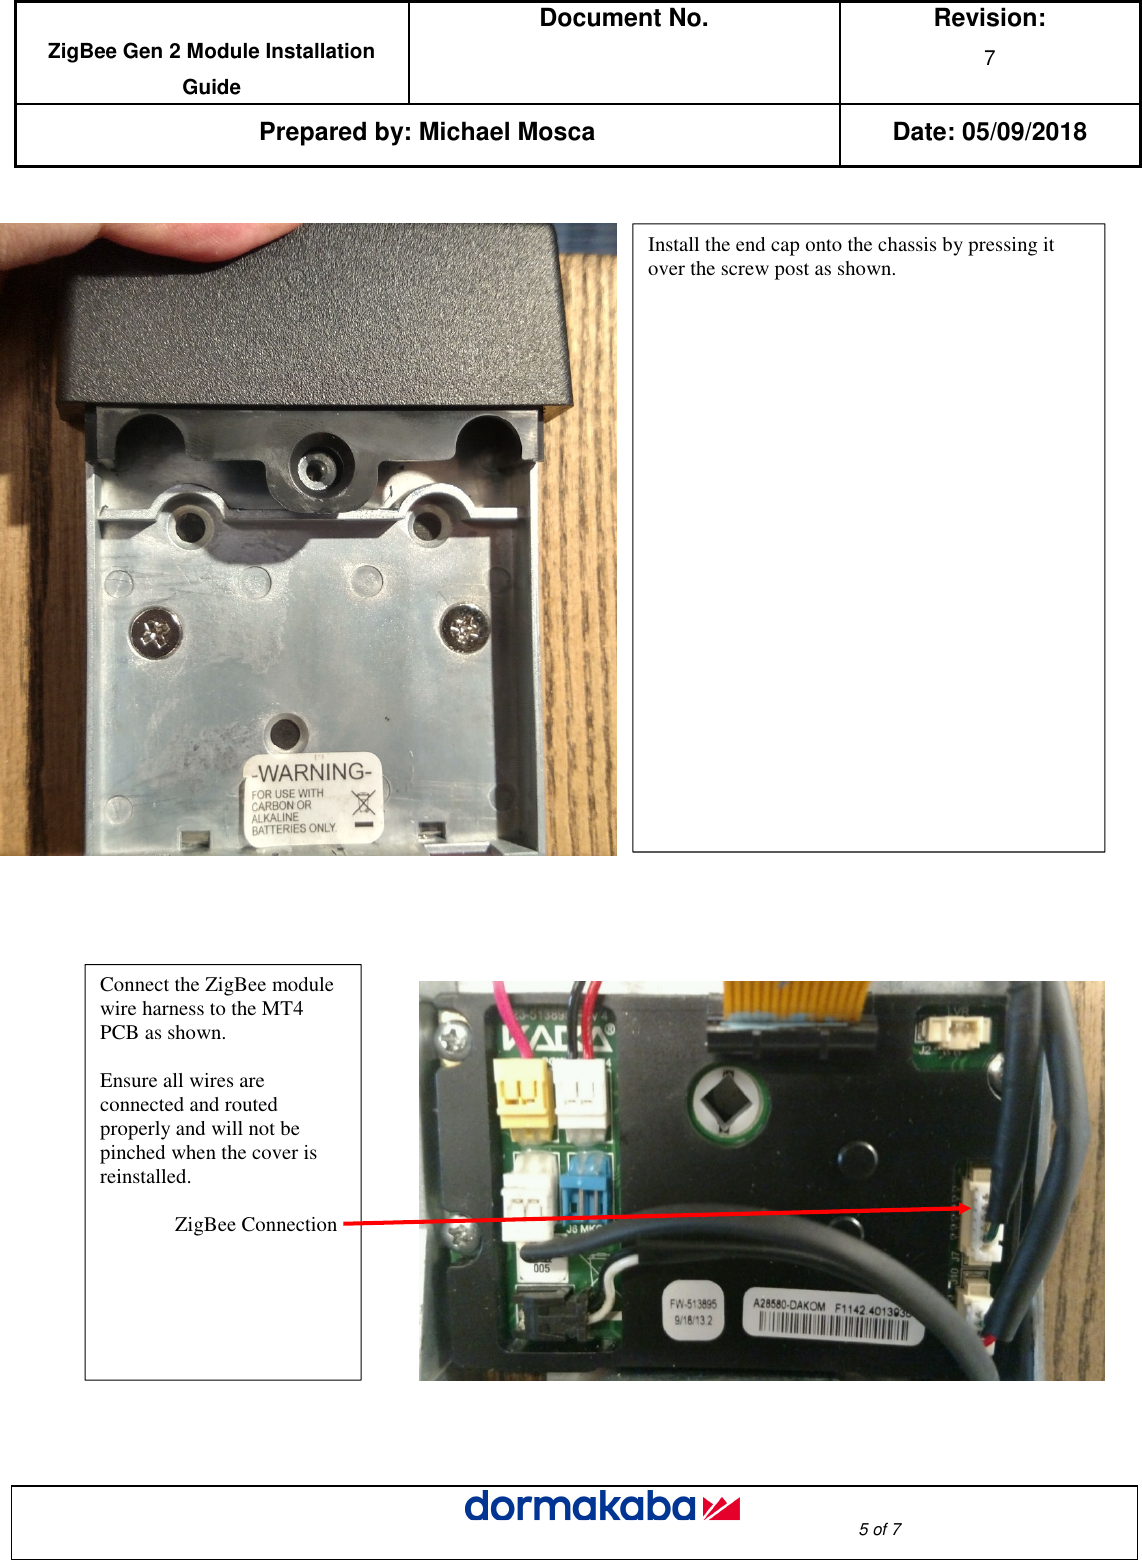  ZigBee Gen 2 Module Installation Guide Document No.  Revision: 7  Prepared by: Michael Mosca Date: 05/09/2018                                                                                                                                                                                                     5 of 7                                                         Install the end cap onto the chassis by pressing it over the screw post as shown.  Connect the ZigBee module wire harness to the MT4 PCB as shown.  Ensure all wires are connected and routed properly and will not be pinched when the cover is reinstalled.   ZigBee Connection    